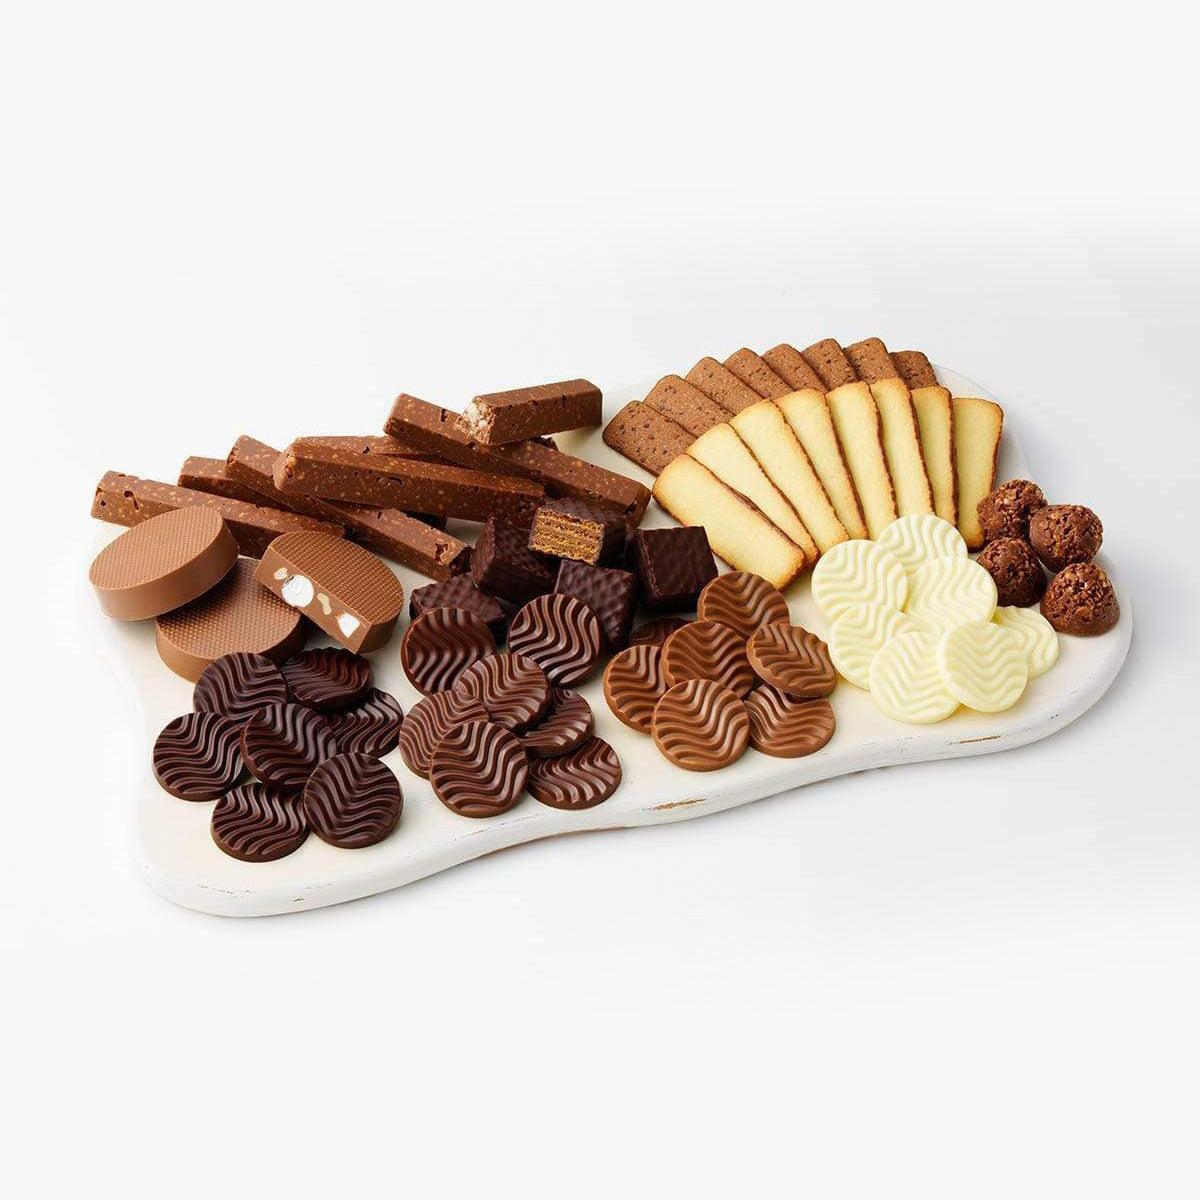 ROYCE' Chocolate - ROYCE' Collection "Blue" - Image shows different kinds of confections in various shapes and colors, as arranged on a white wooden tray.